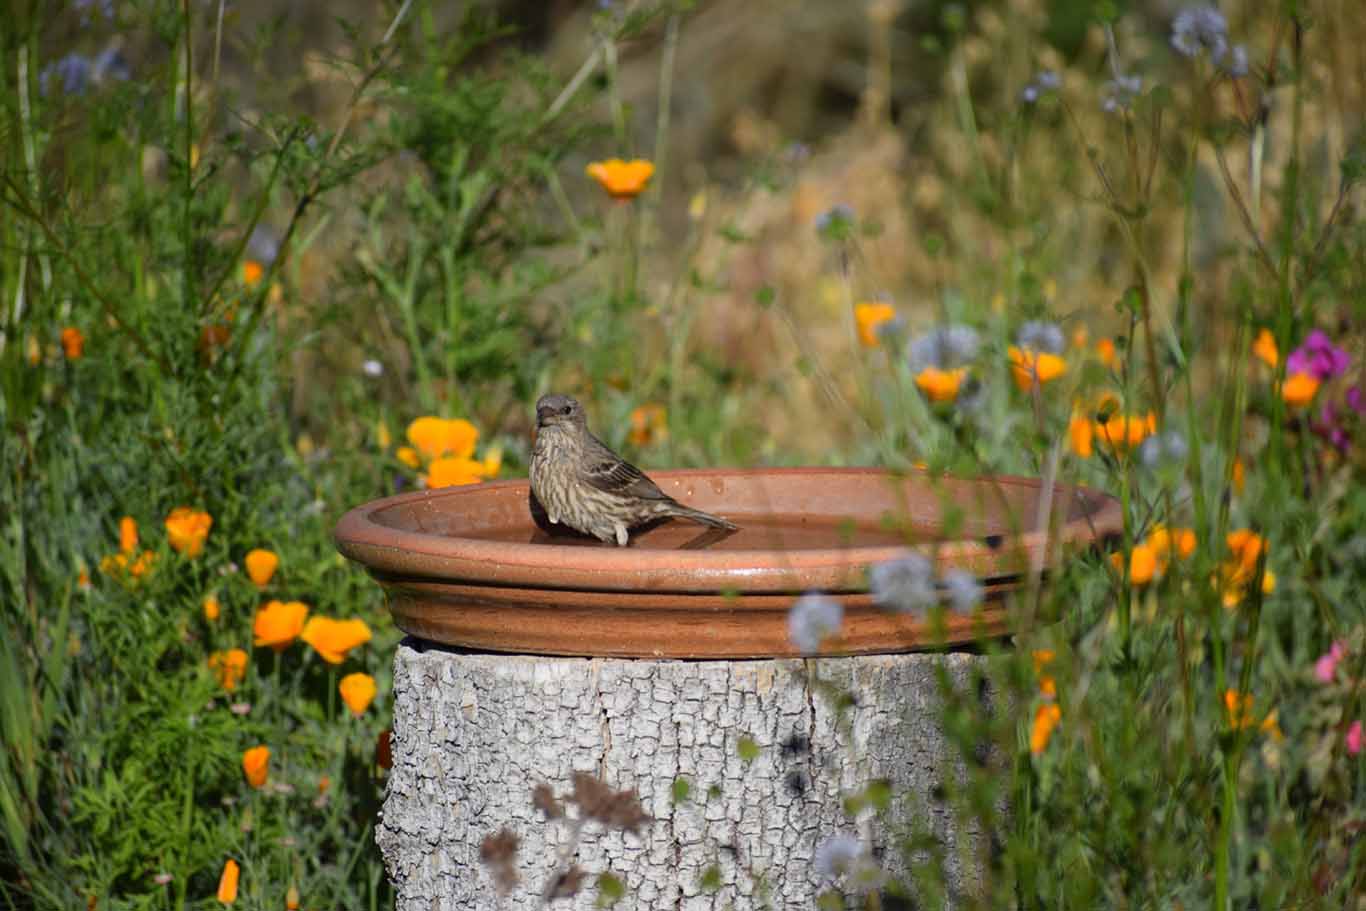 Sparrow enjoying a bath surrounded by annual wildflowers.